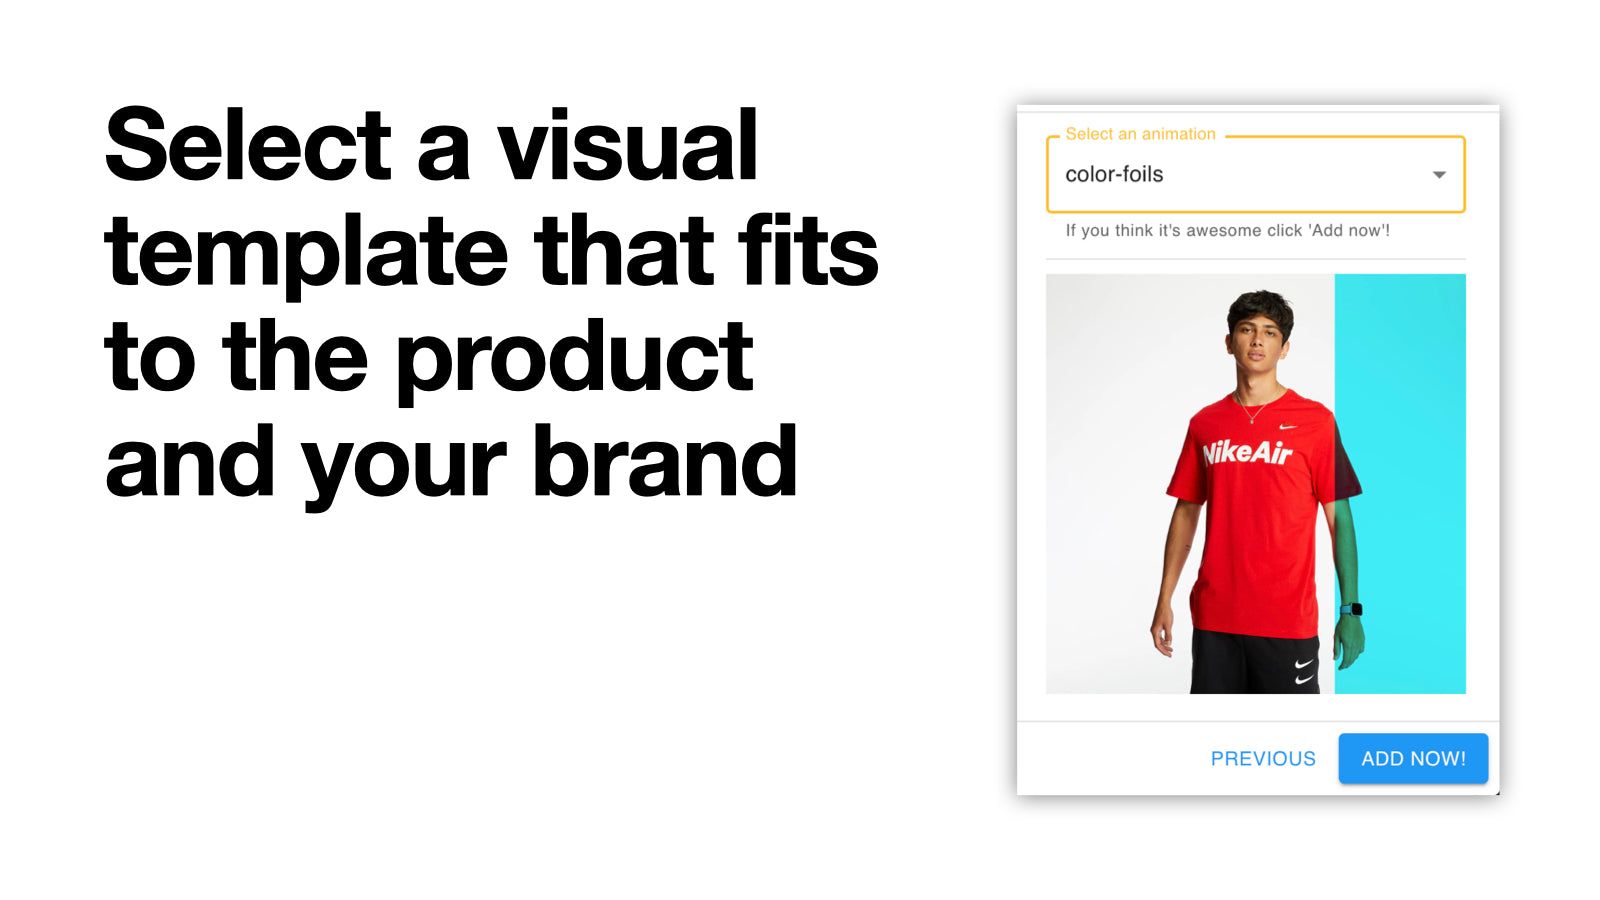 Select a visual template that fits to the product and your brand